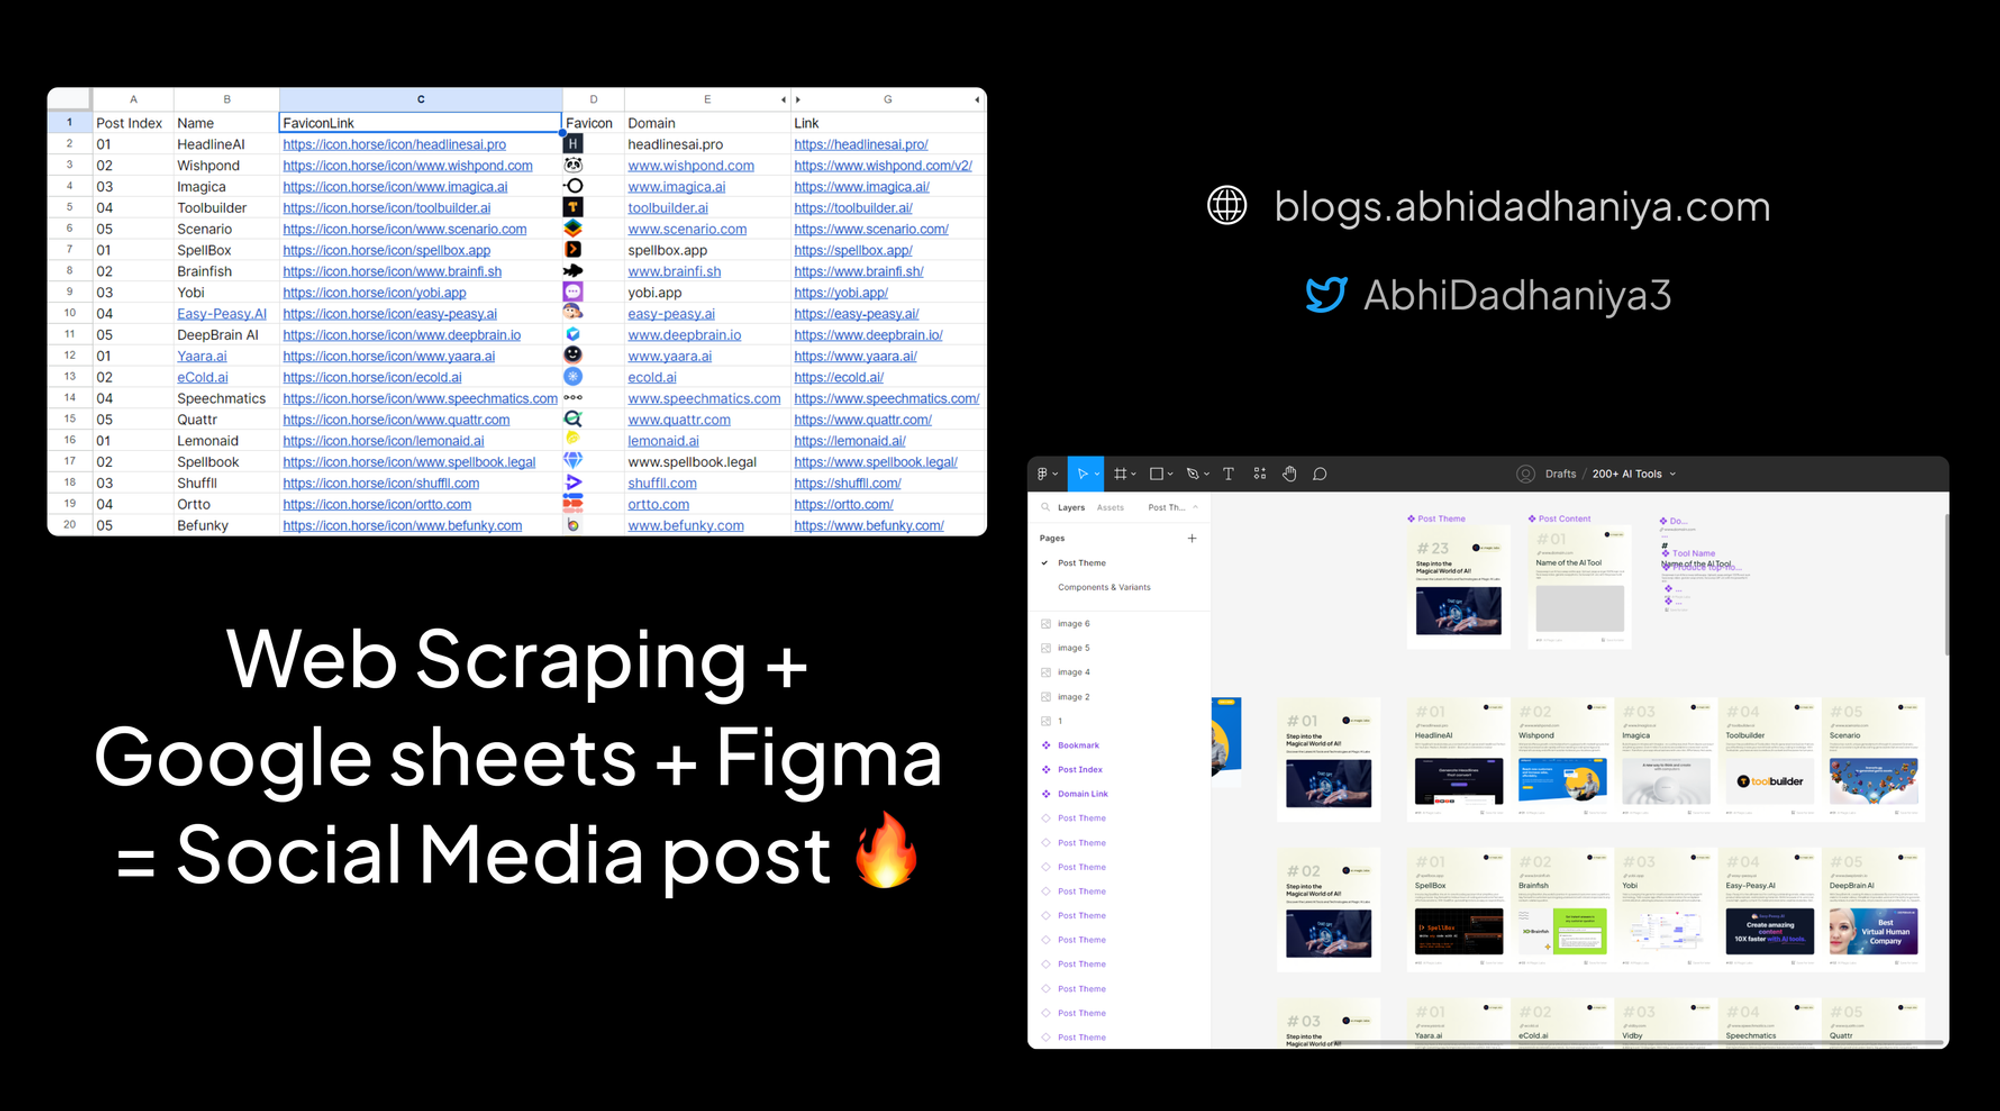 Automate Social Media using Web Scrapping, Google sheets and Figma